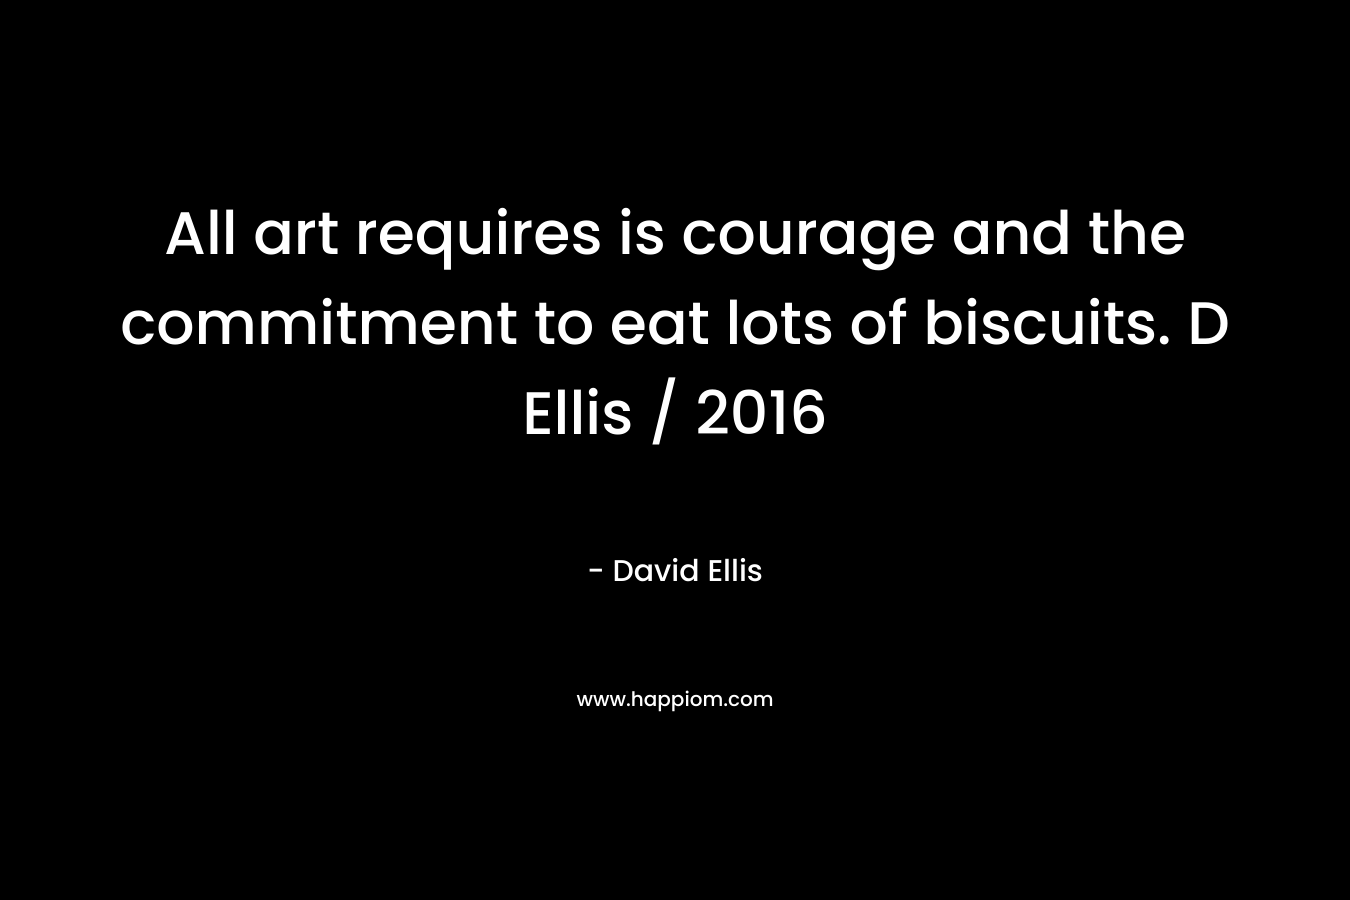 All art requires is courage and the commitment to eat lots of biscuits. D Ellis / 2016